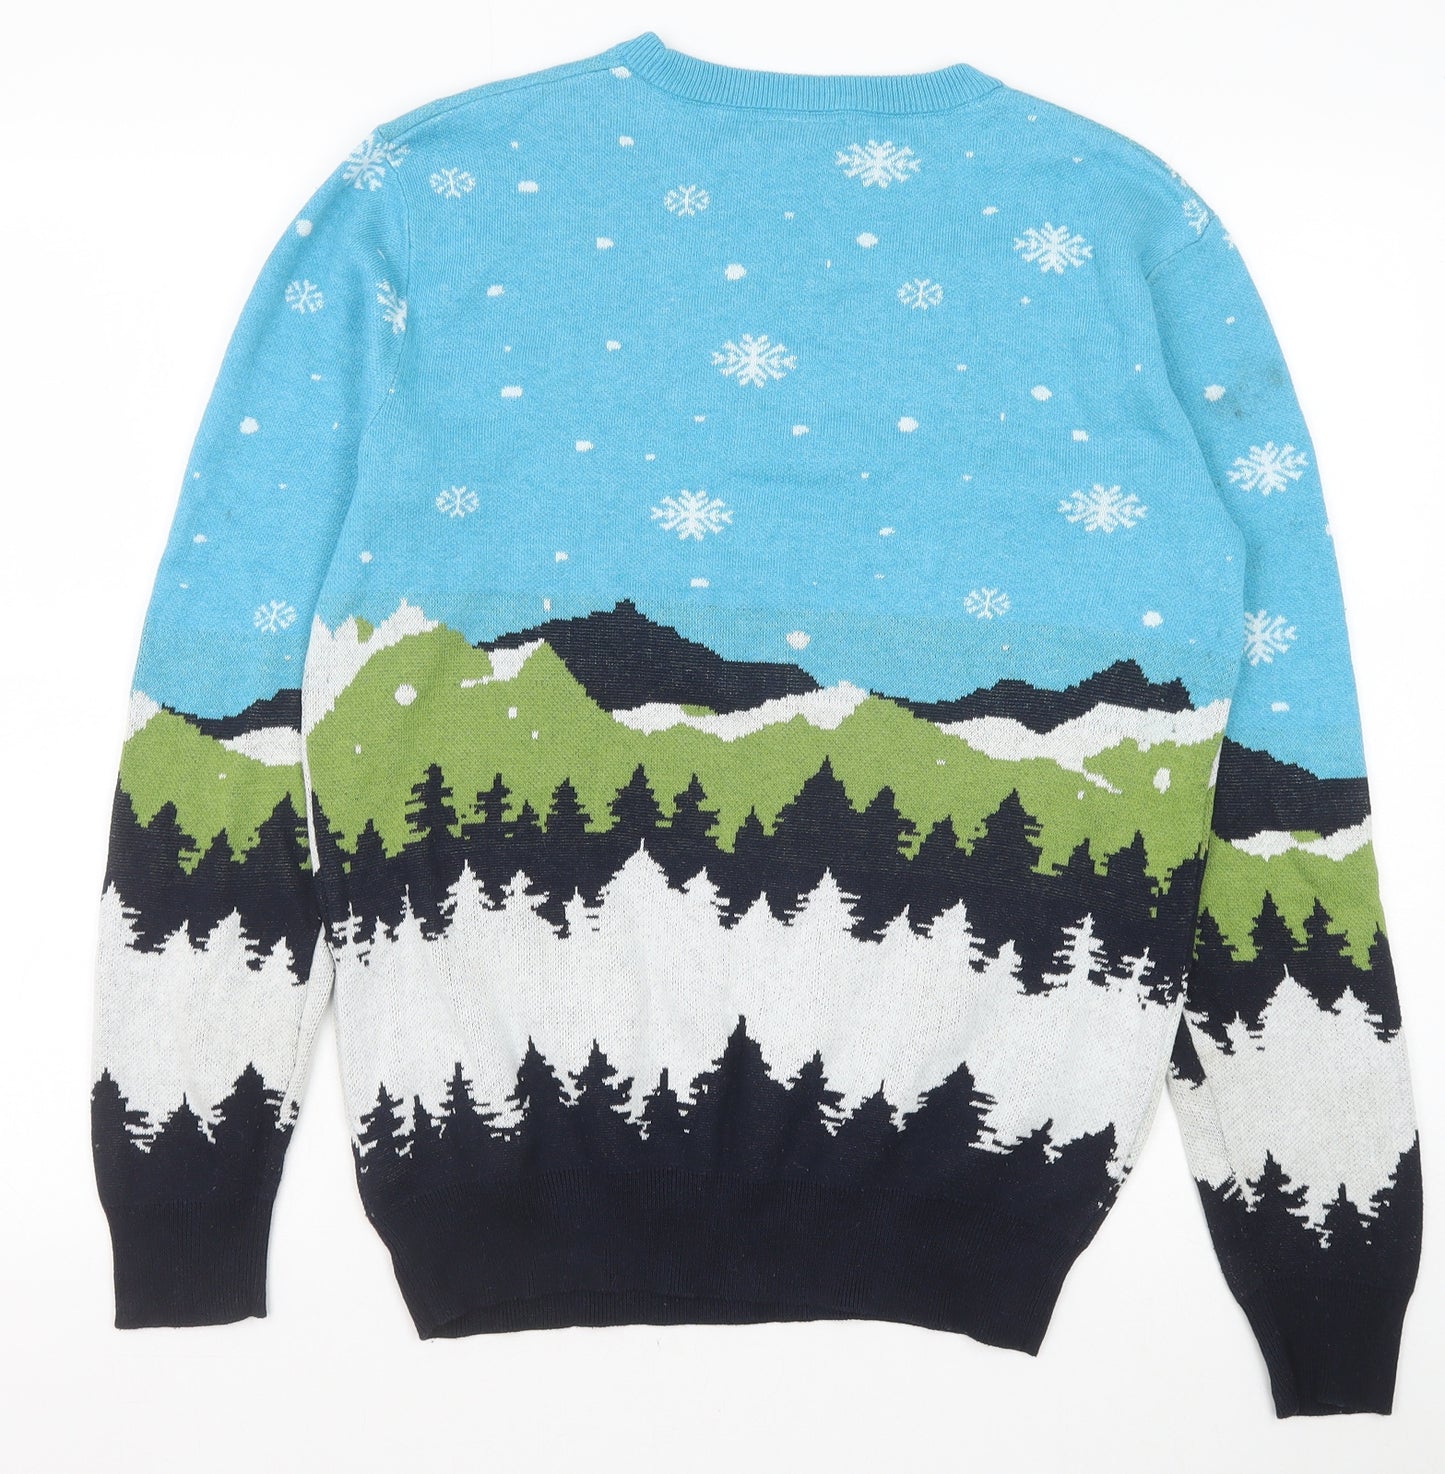 Primark Mens Blue Round Neck Polyester Pullover Jumper Size M Long Sleeve - The Grinch